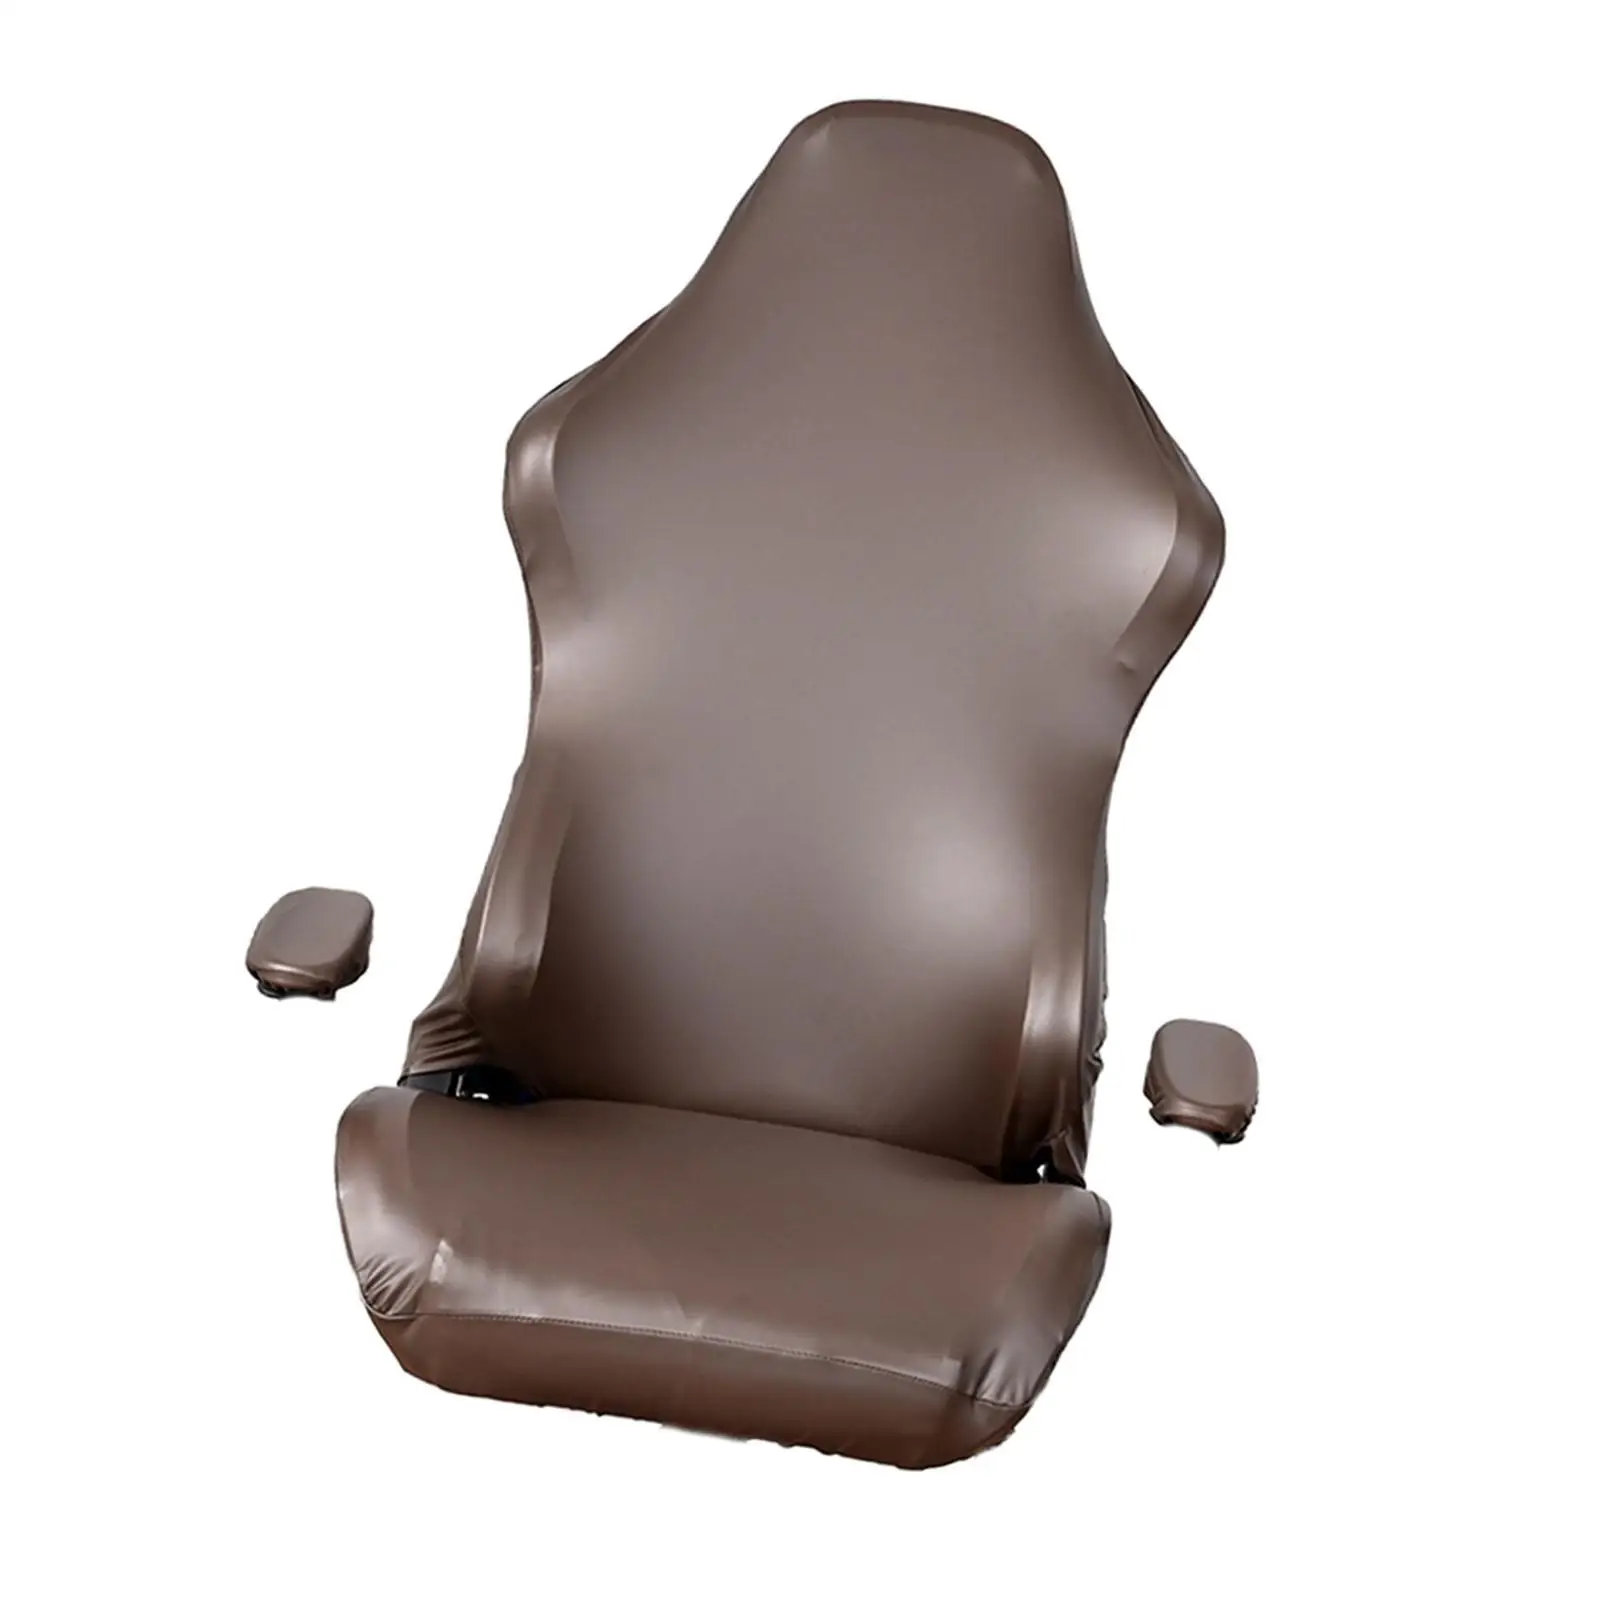 Gaming Chair Slipcovers Removable Polyester Arm Rest Cover for Dinning Chair